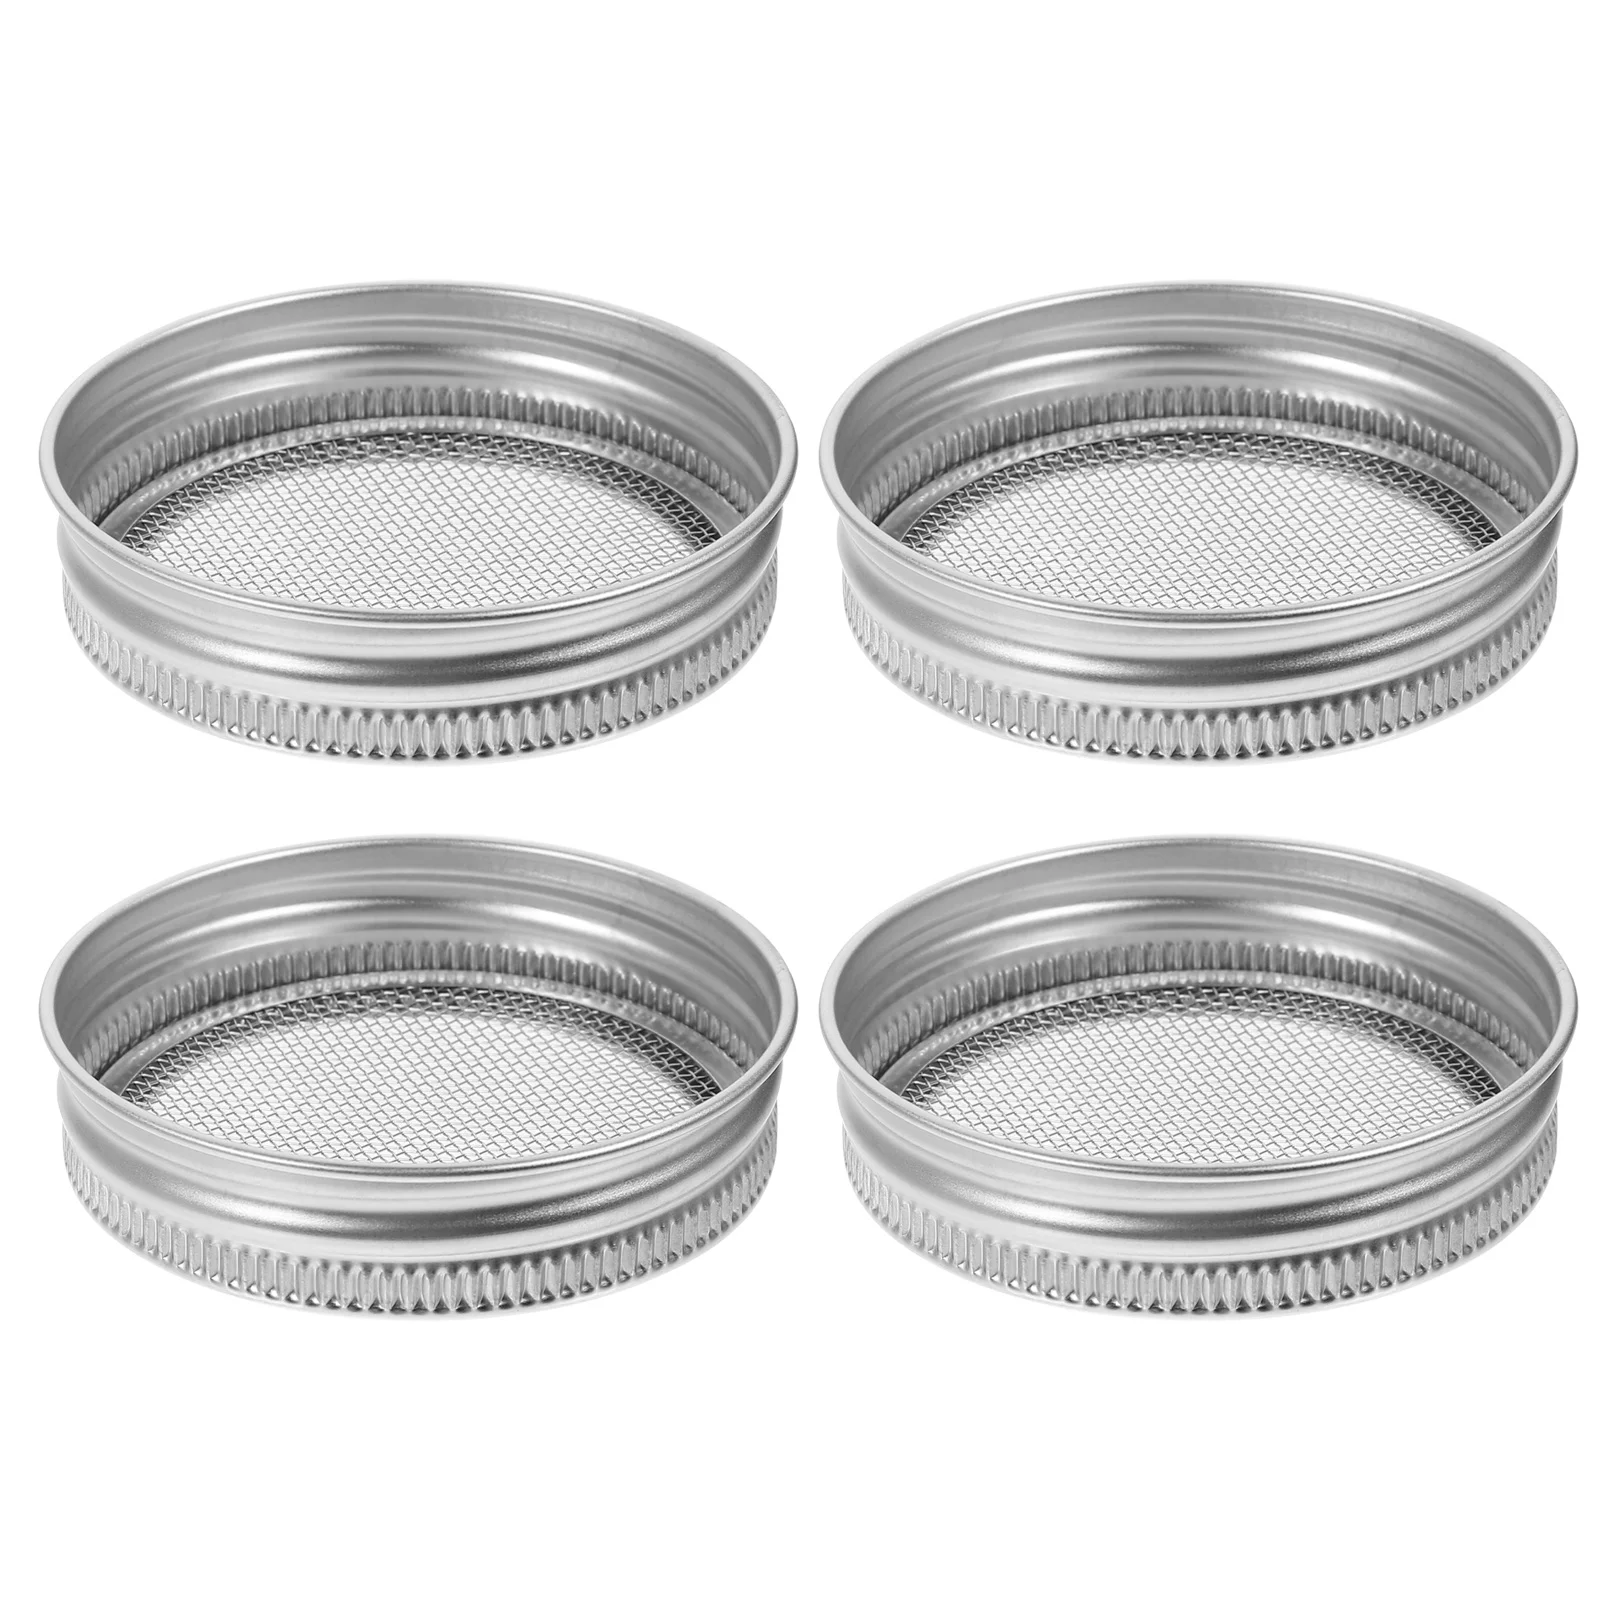 

4 Pcs Stainless Steel Mesh Screen Sprout Lids Strainer Sprouting Cans Maker Jar Sprouter Bean Sprouts Mason